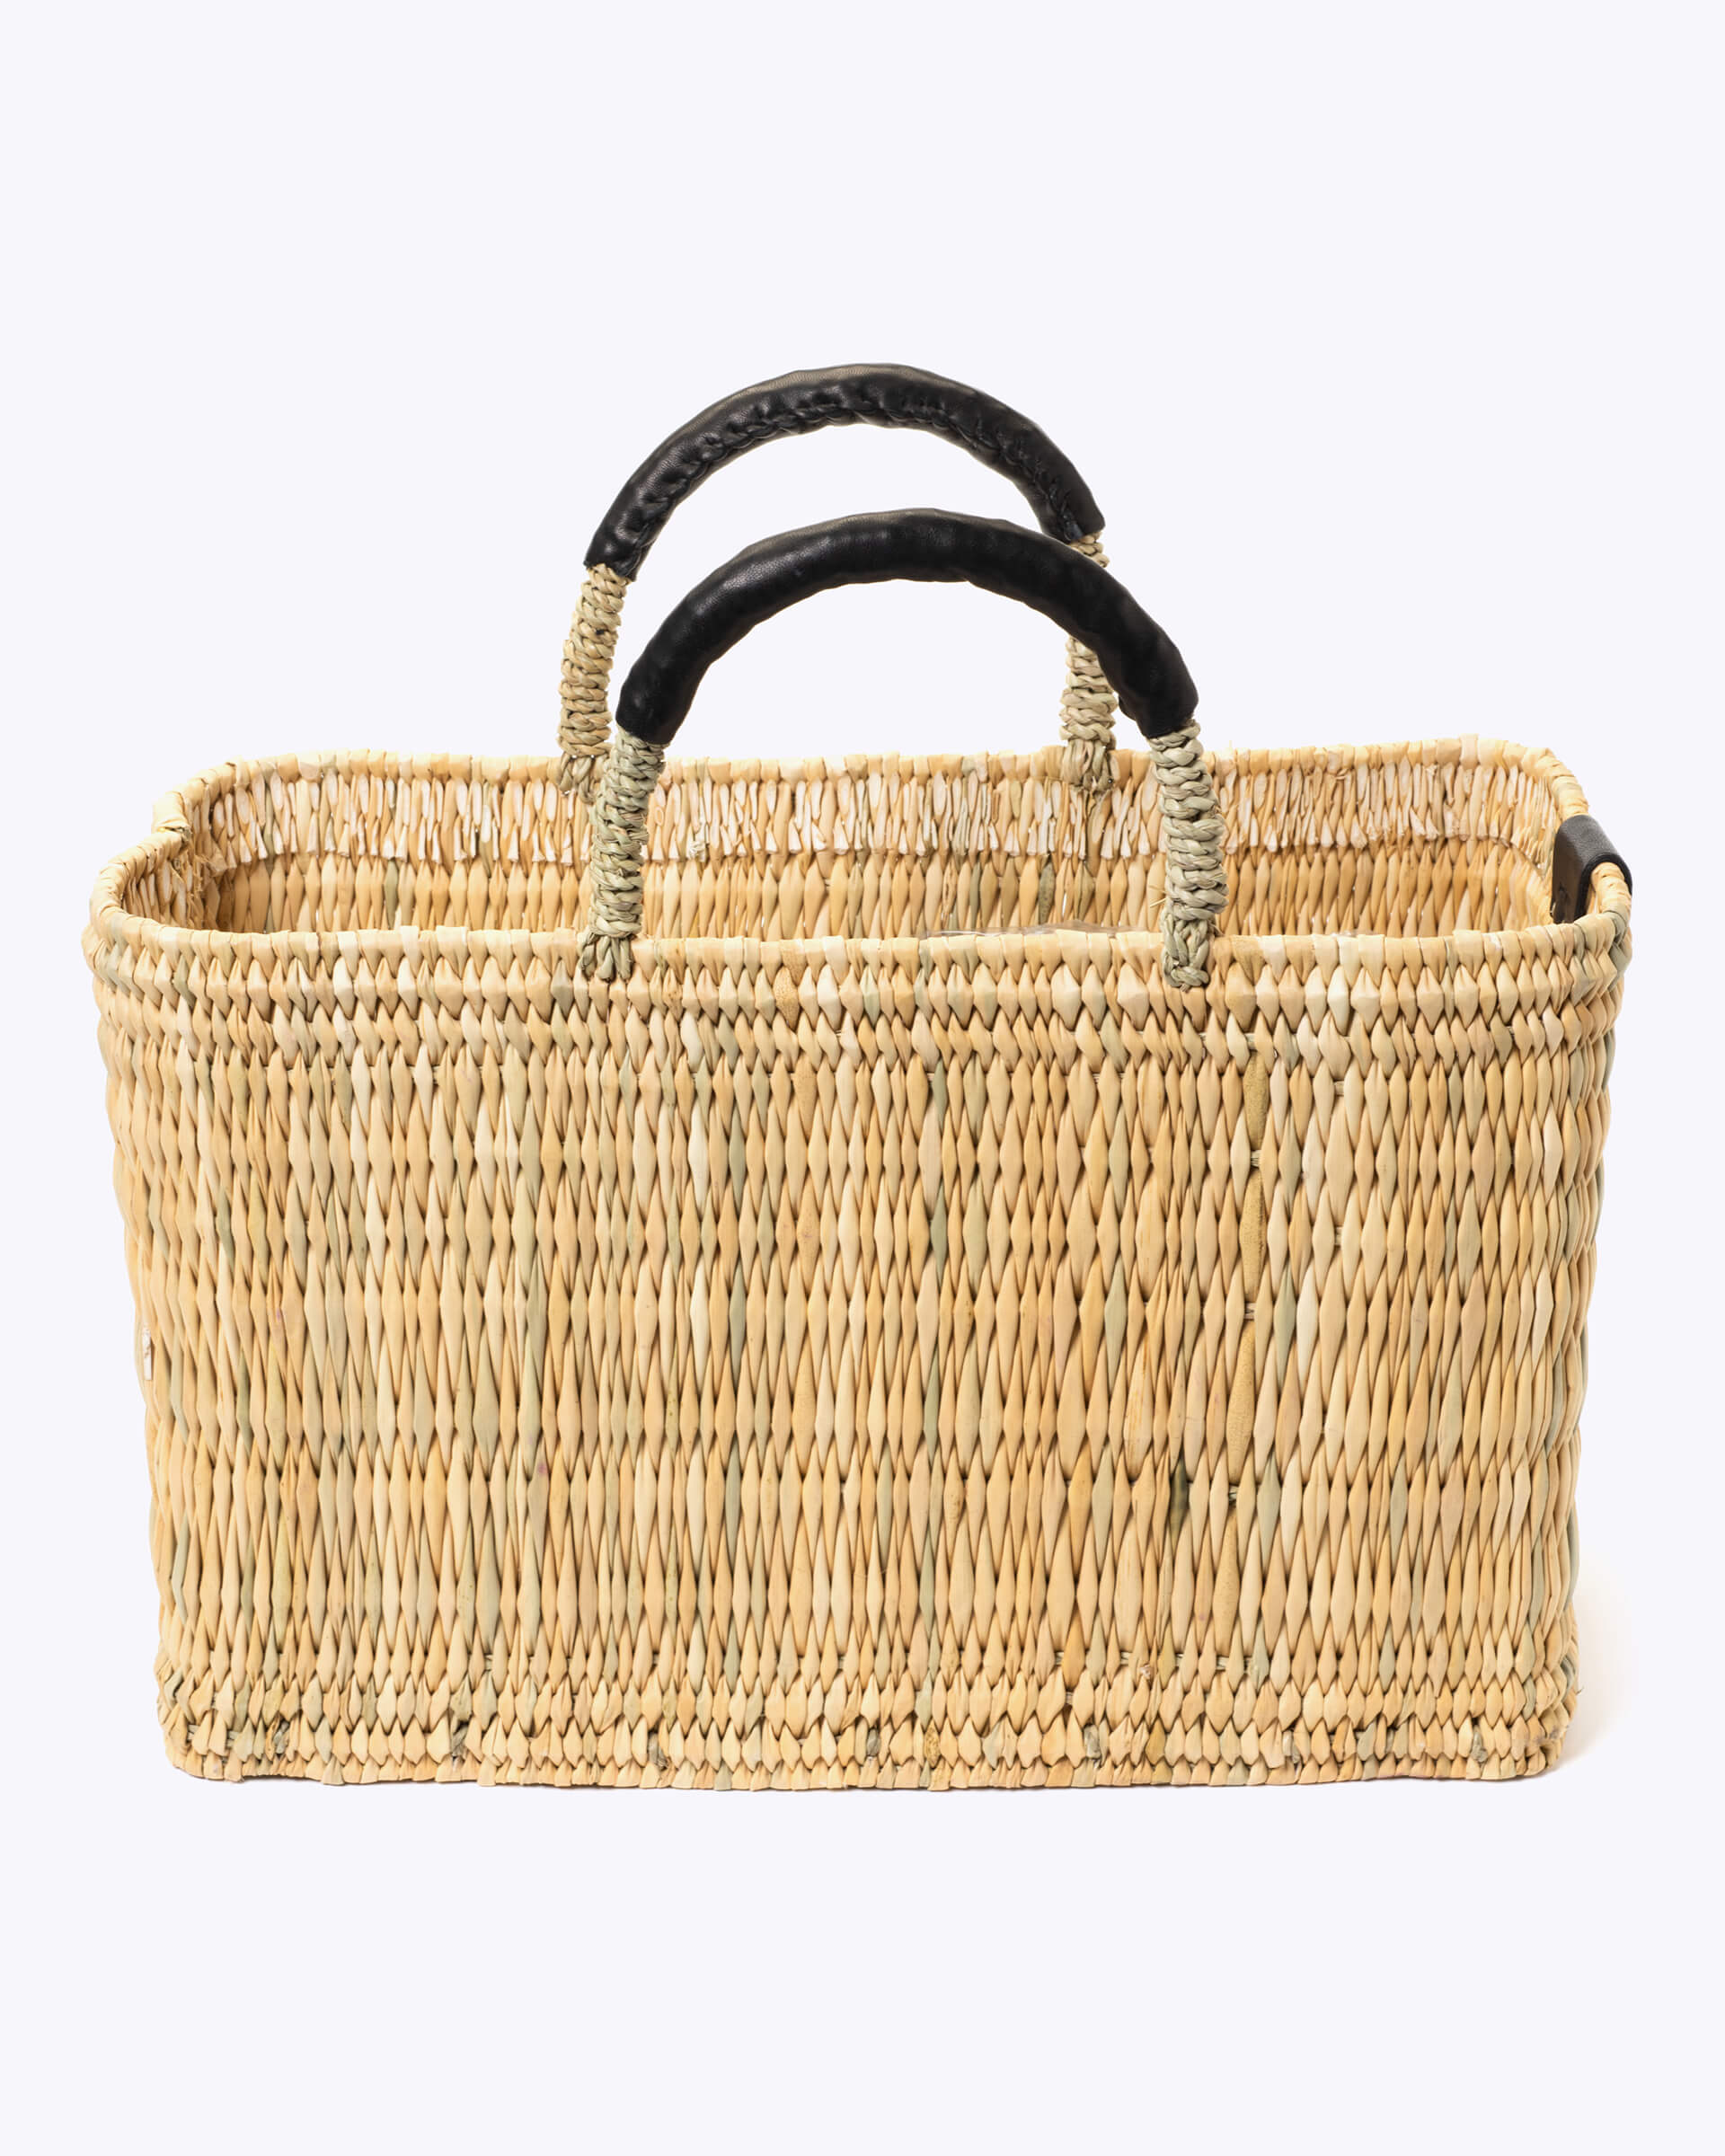  FRENCH BASKET straw beach bag with leather handles, straw bag,  beach bag, basket bag, shopping basket, wicker basket with handle, straw  market basket : Handmade Products